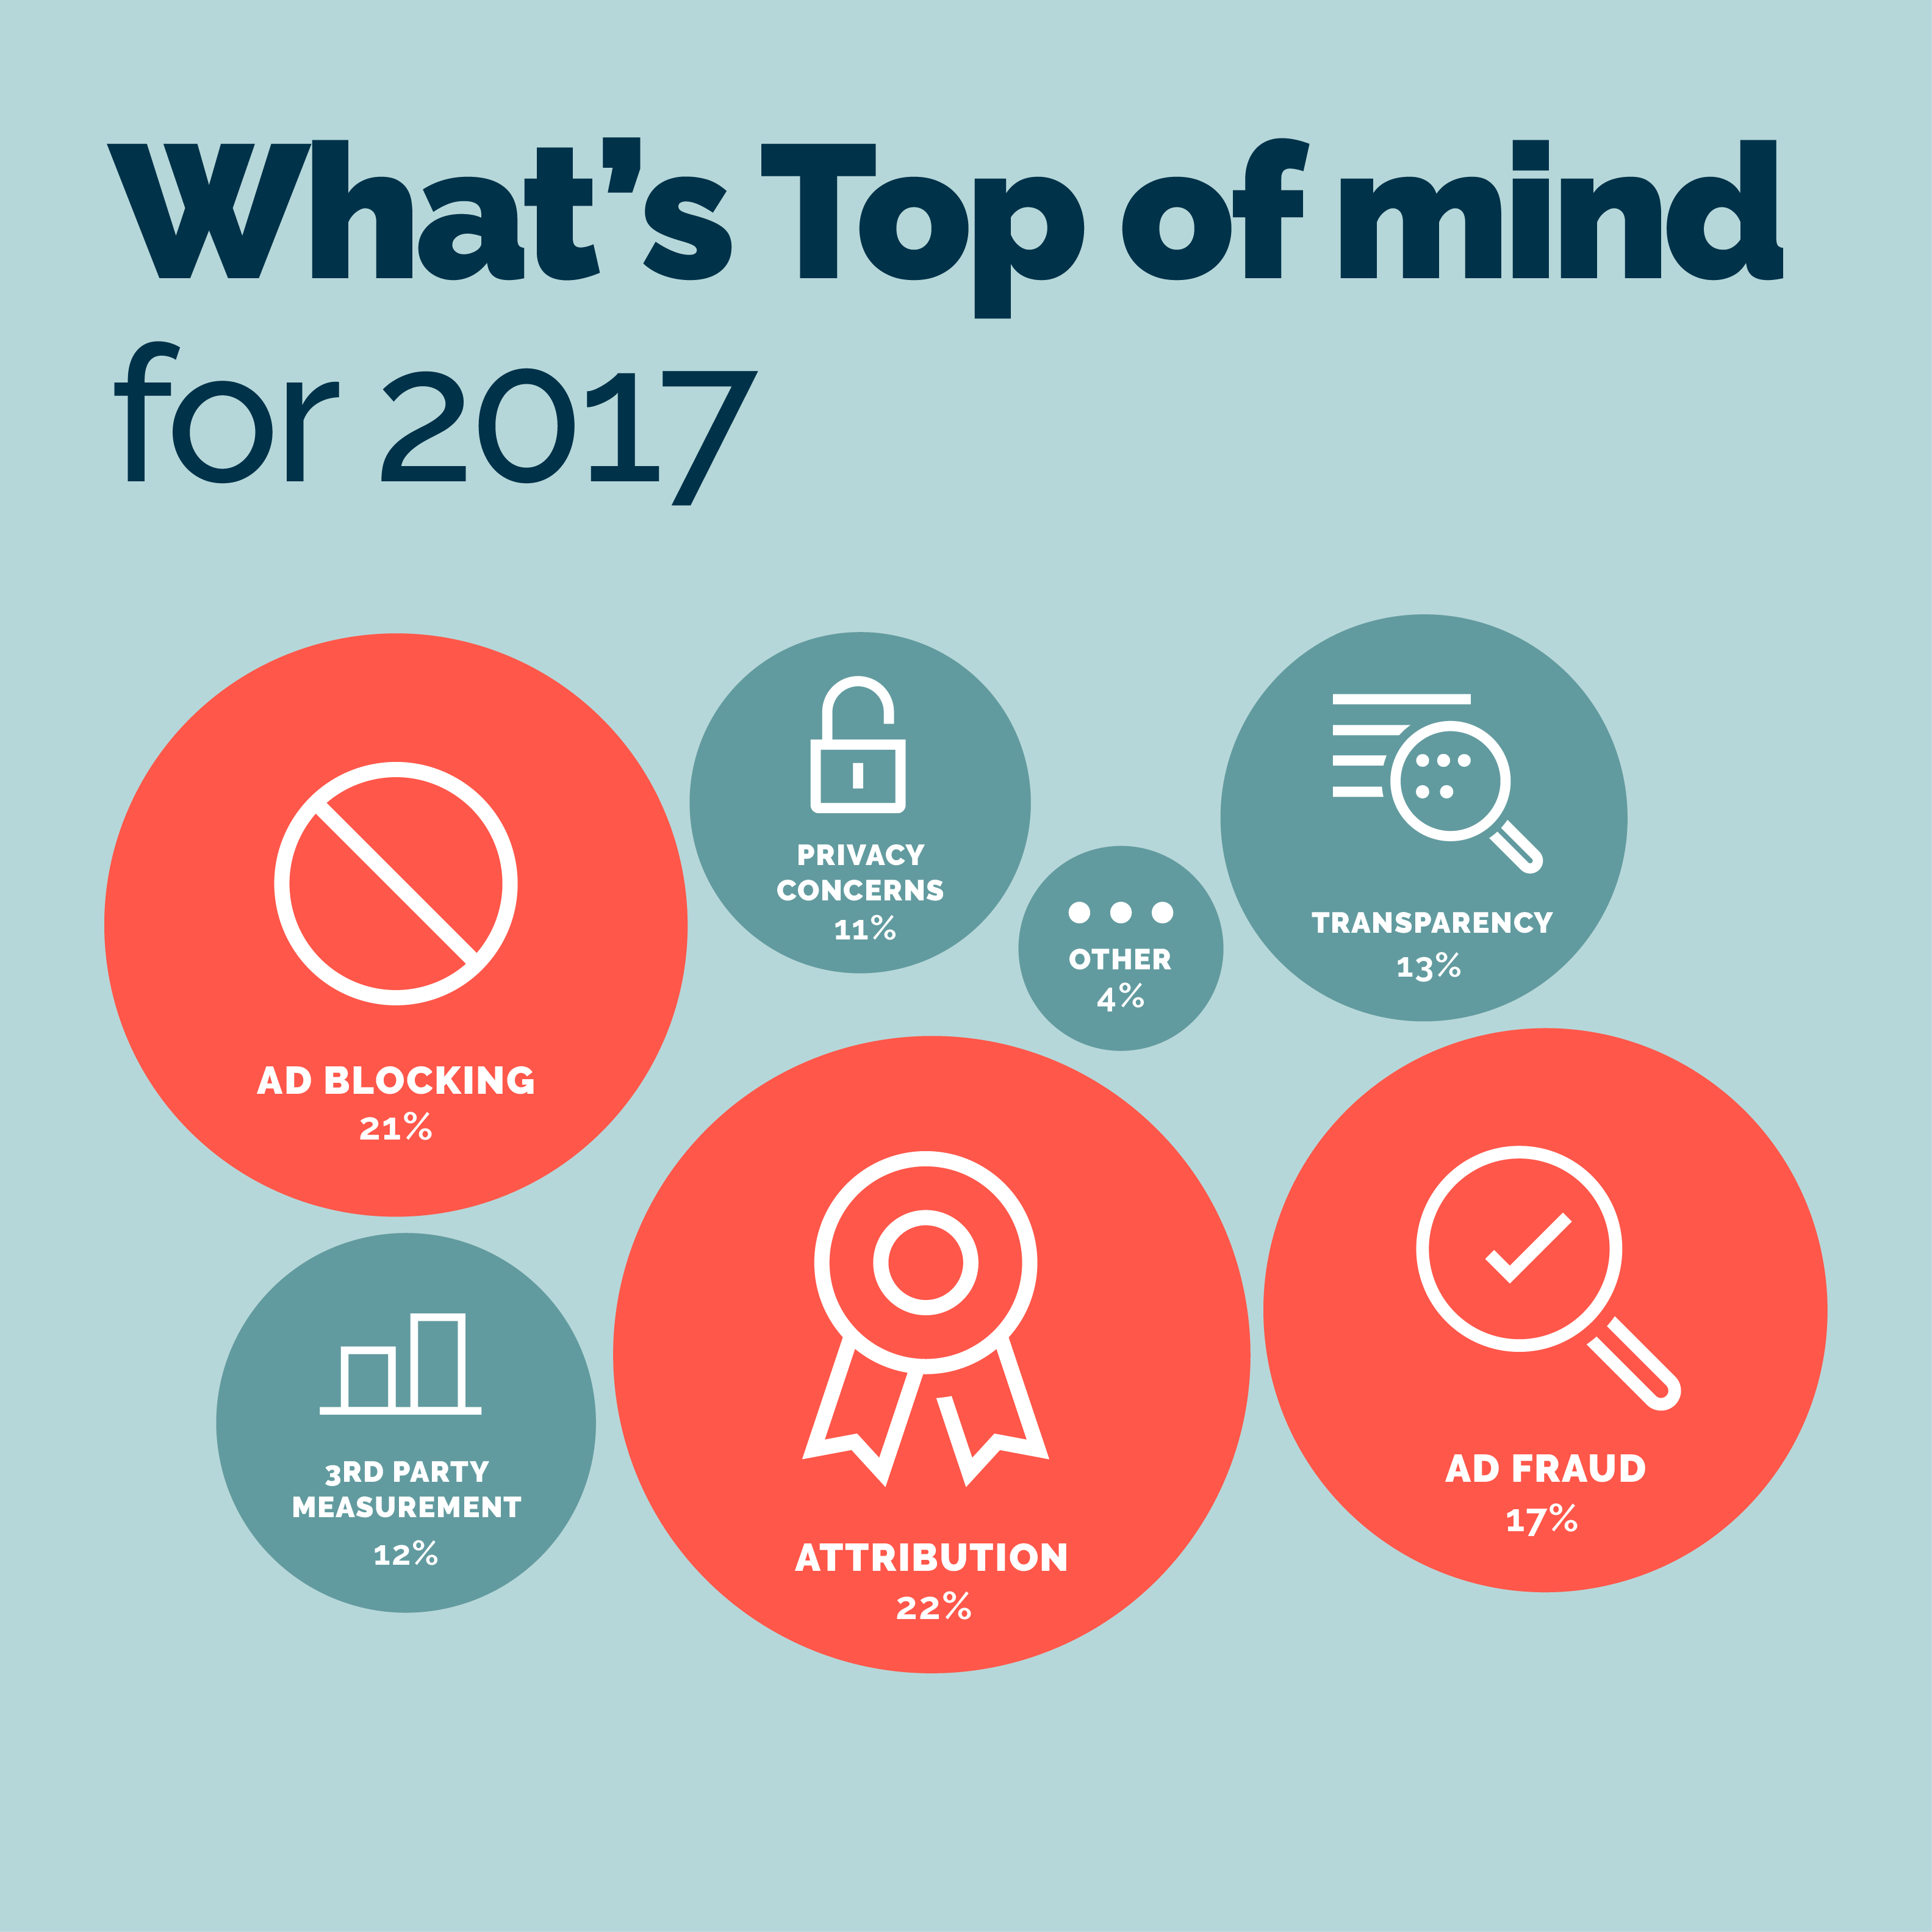 What’s top of mind for 2017?